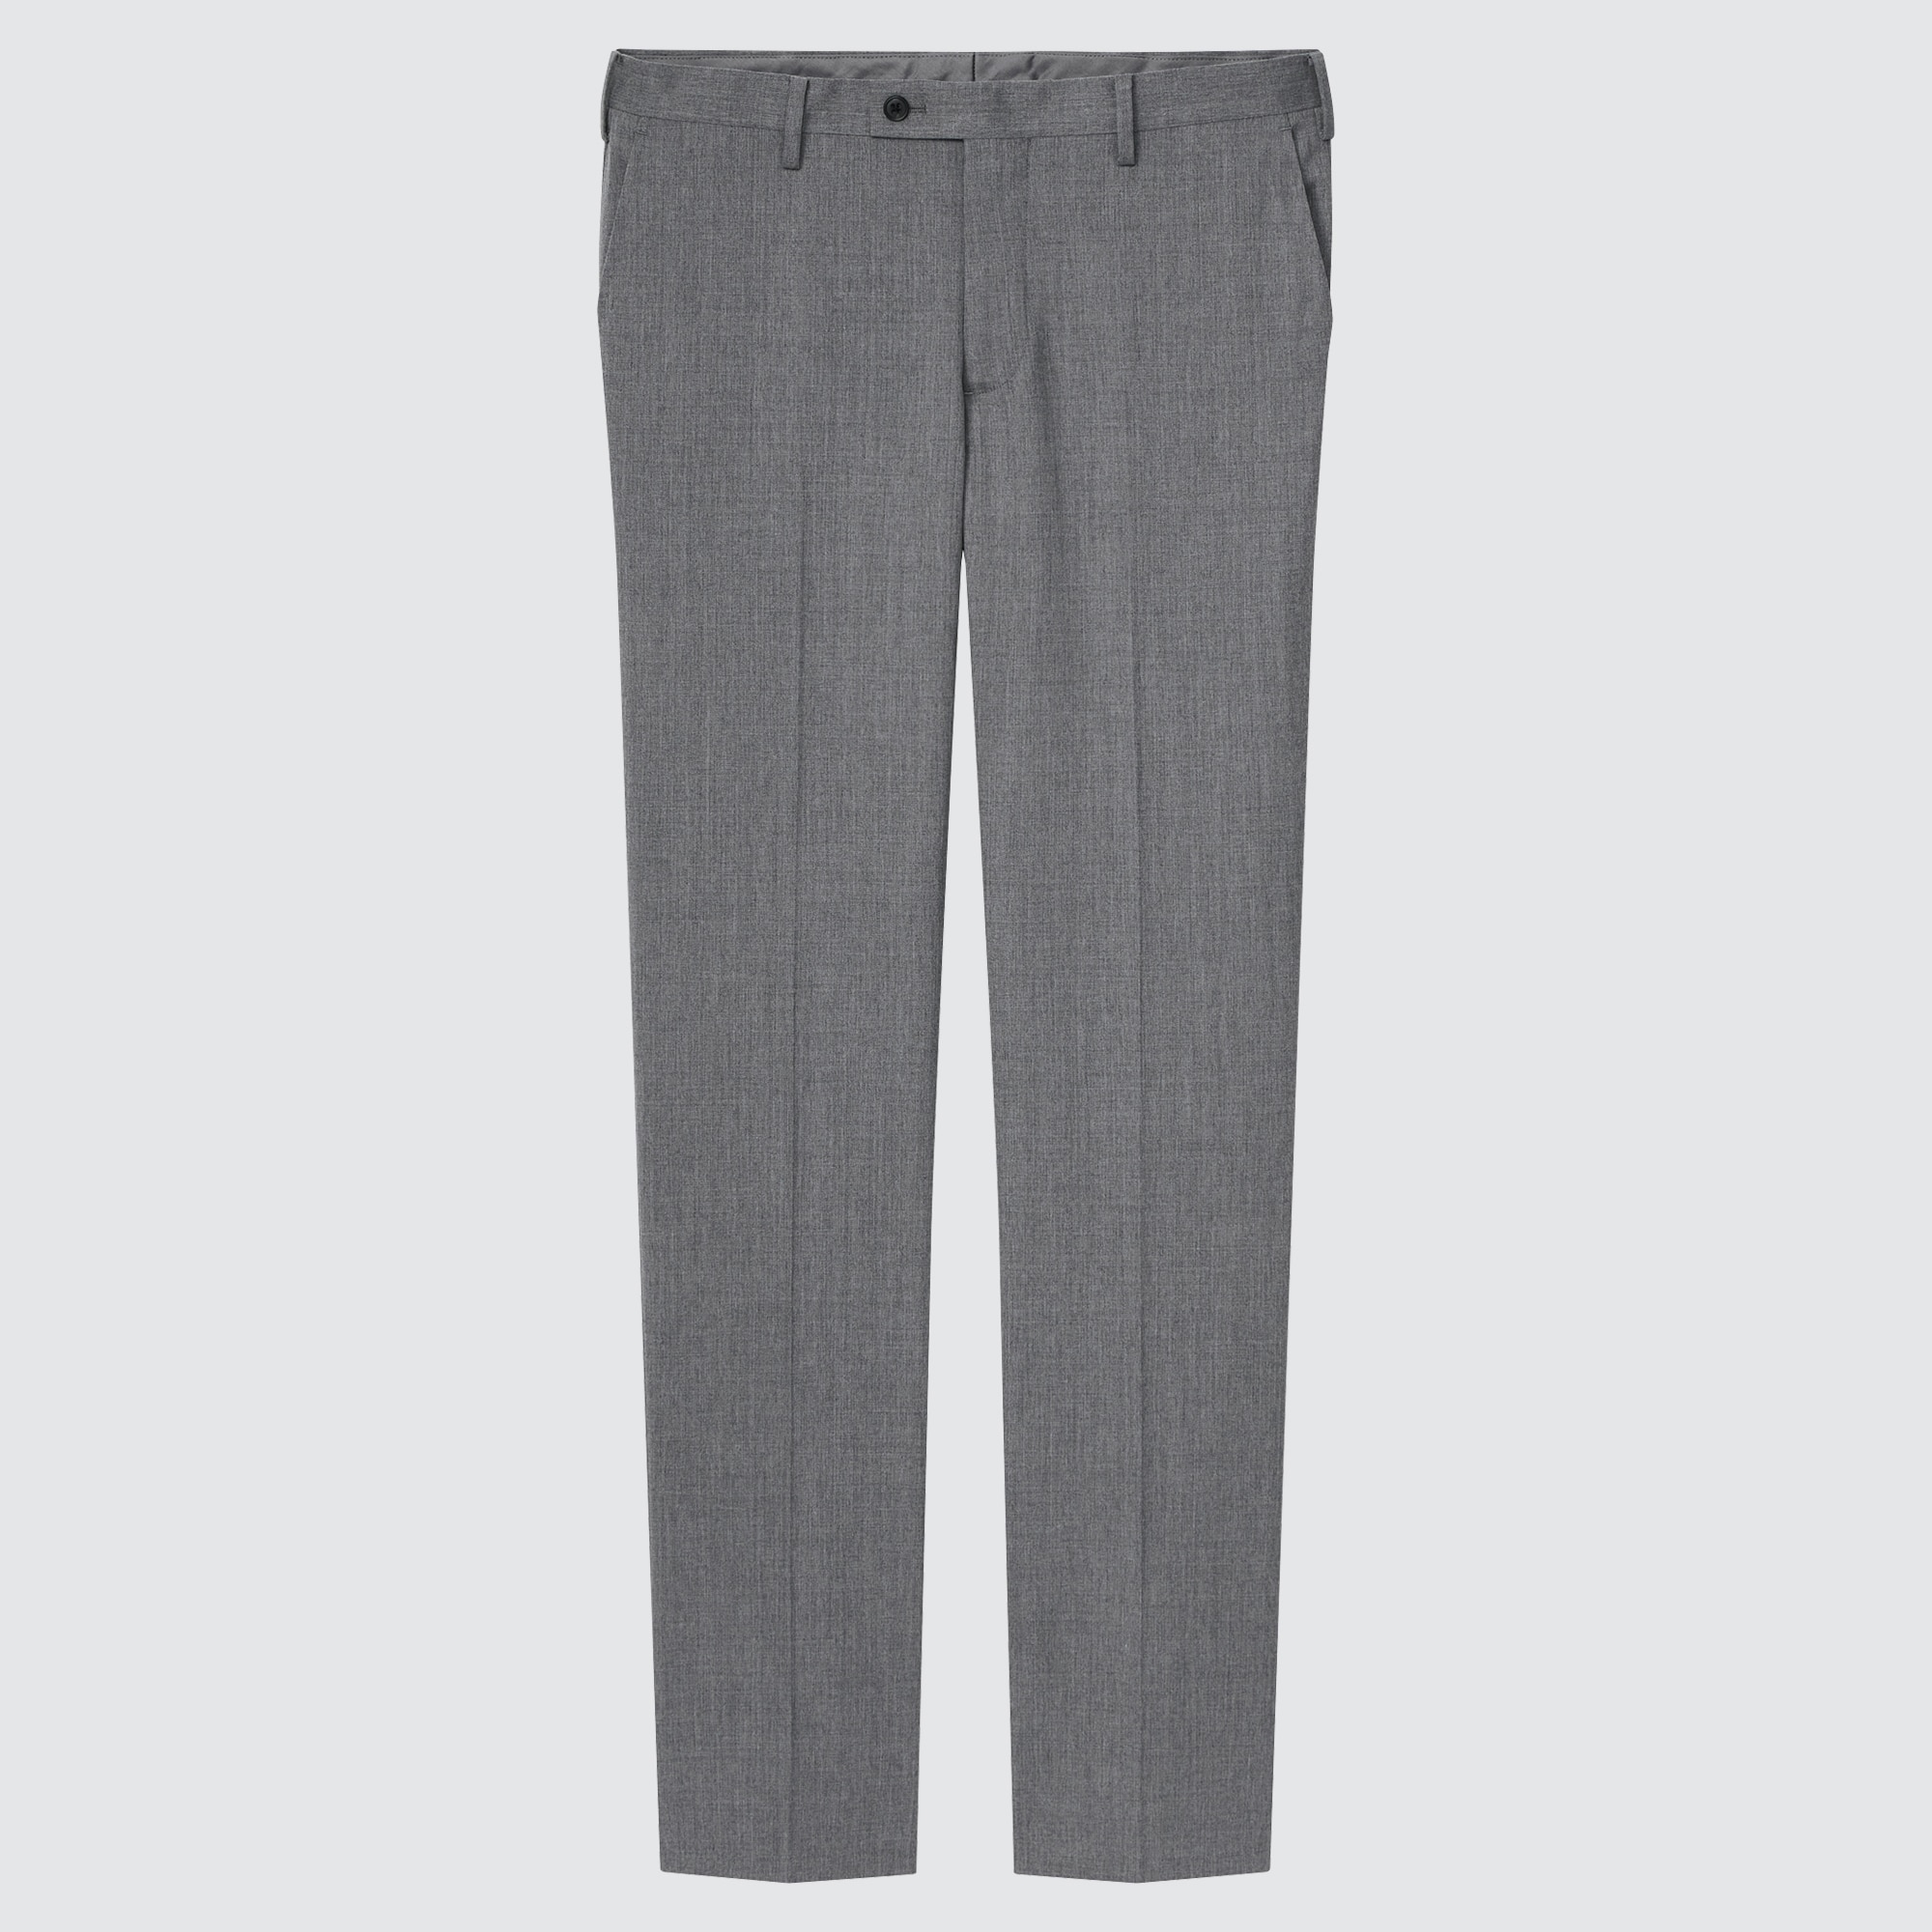 mens casual grey trousers